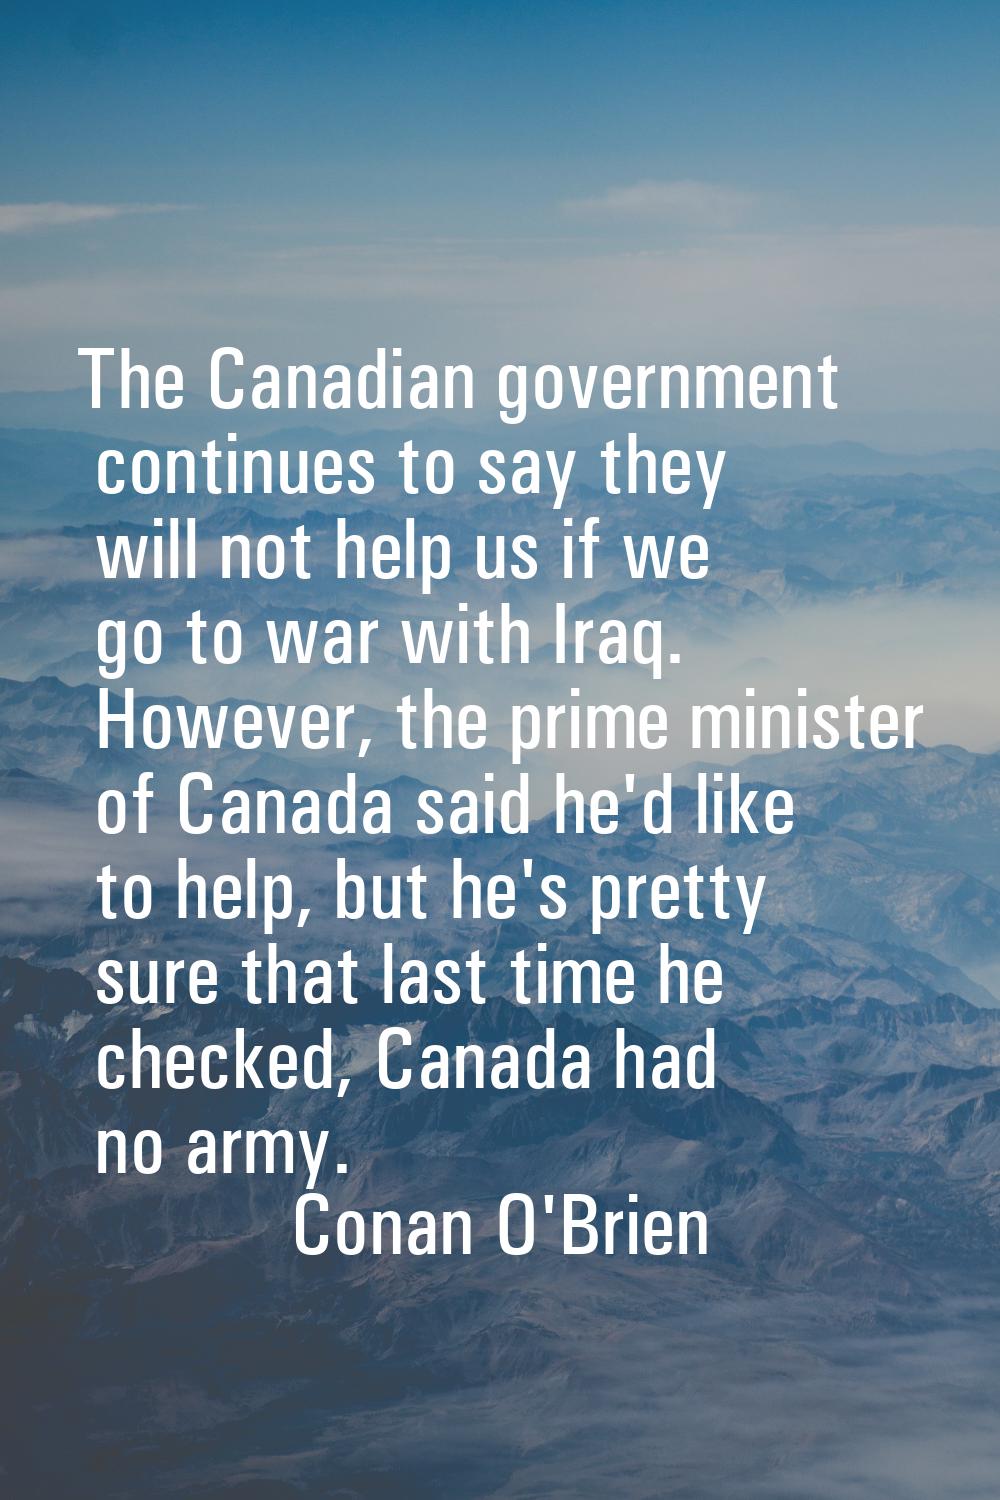 The Canadian government continues to say they will not help us if we go to war with Iraq. However, 